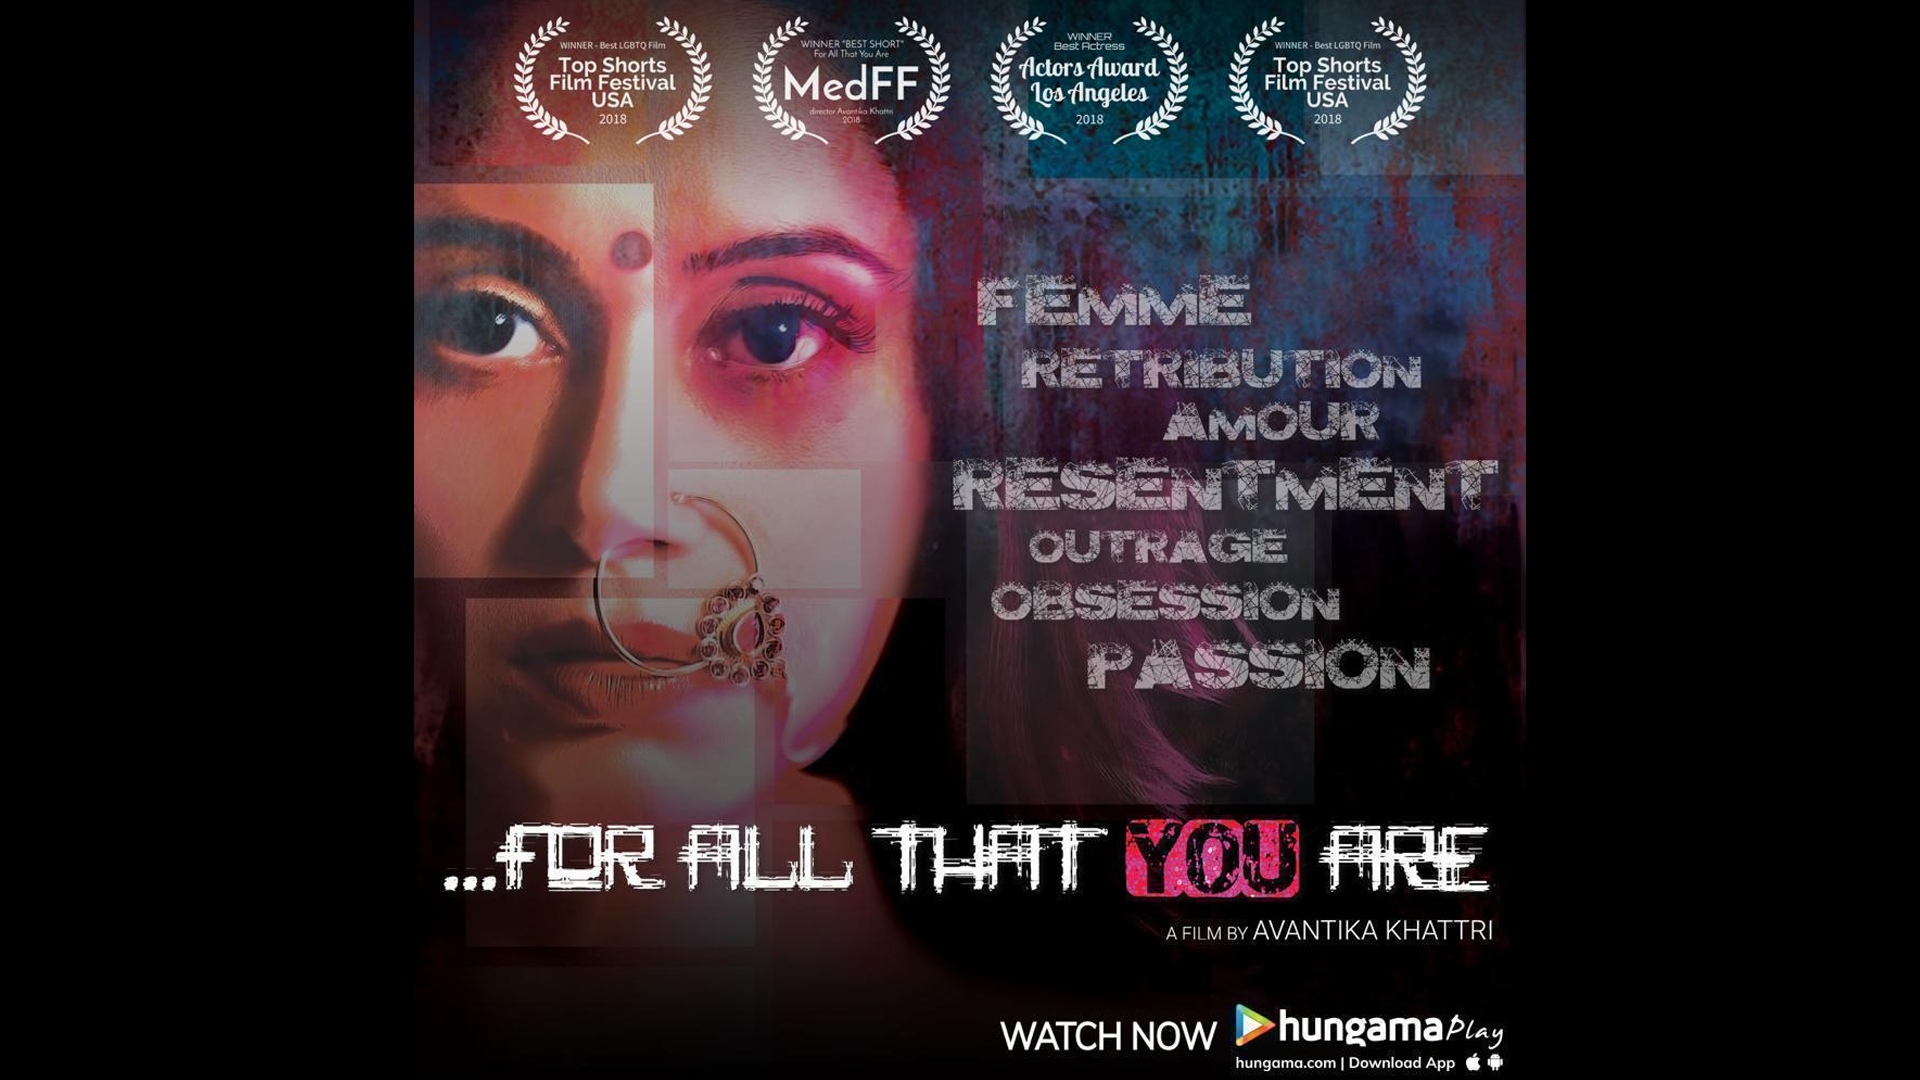 Hungama Play premieres ‘For All That You Are’ – an award winning short film about love and retribution